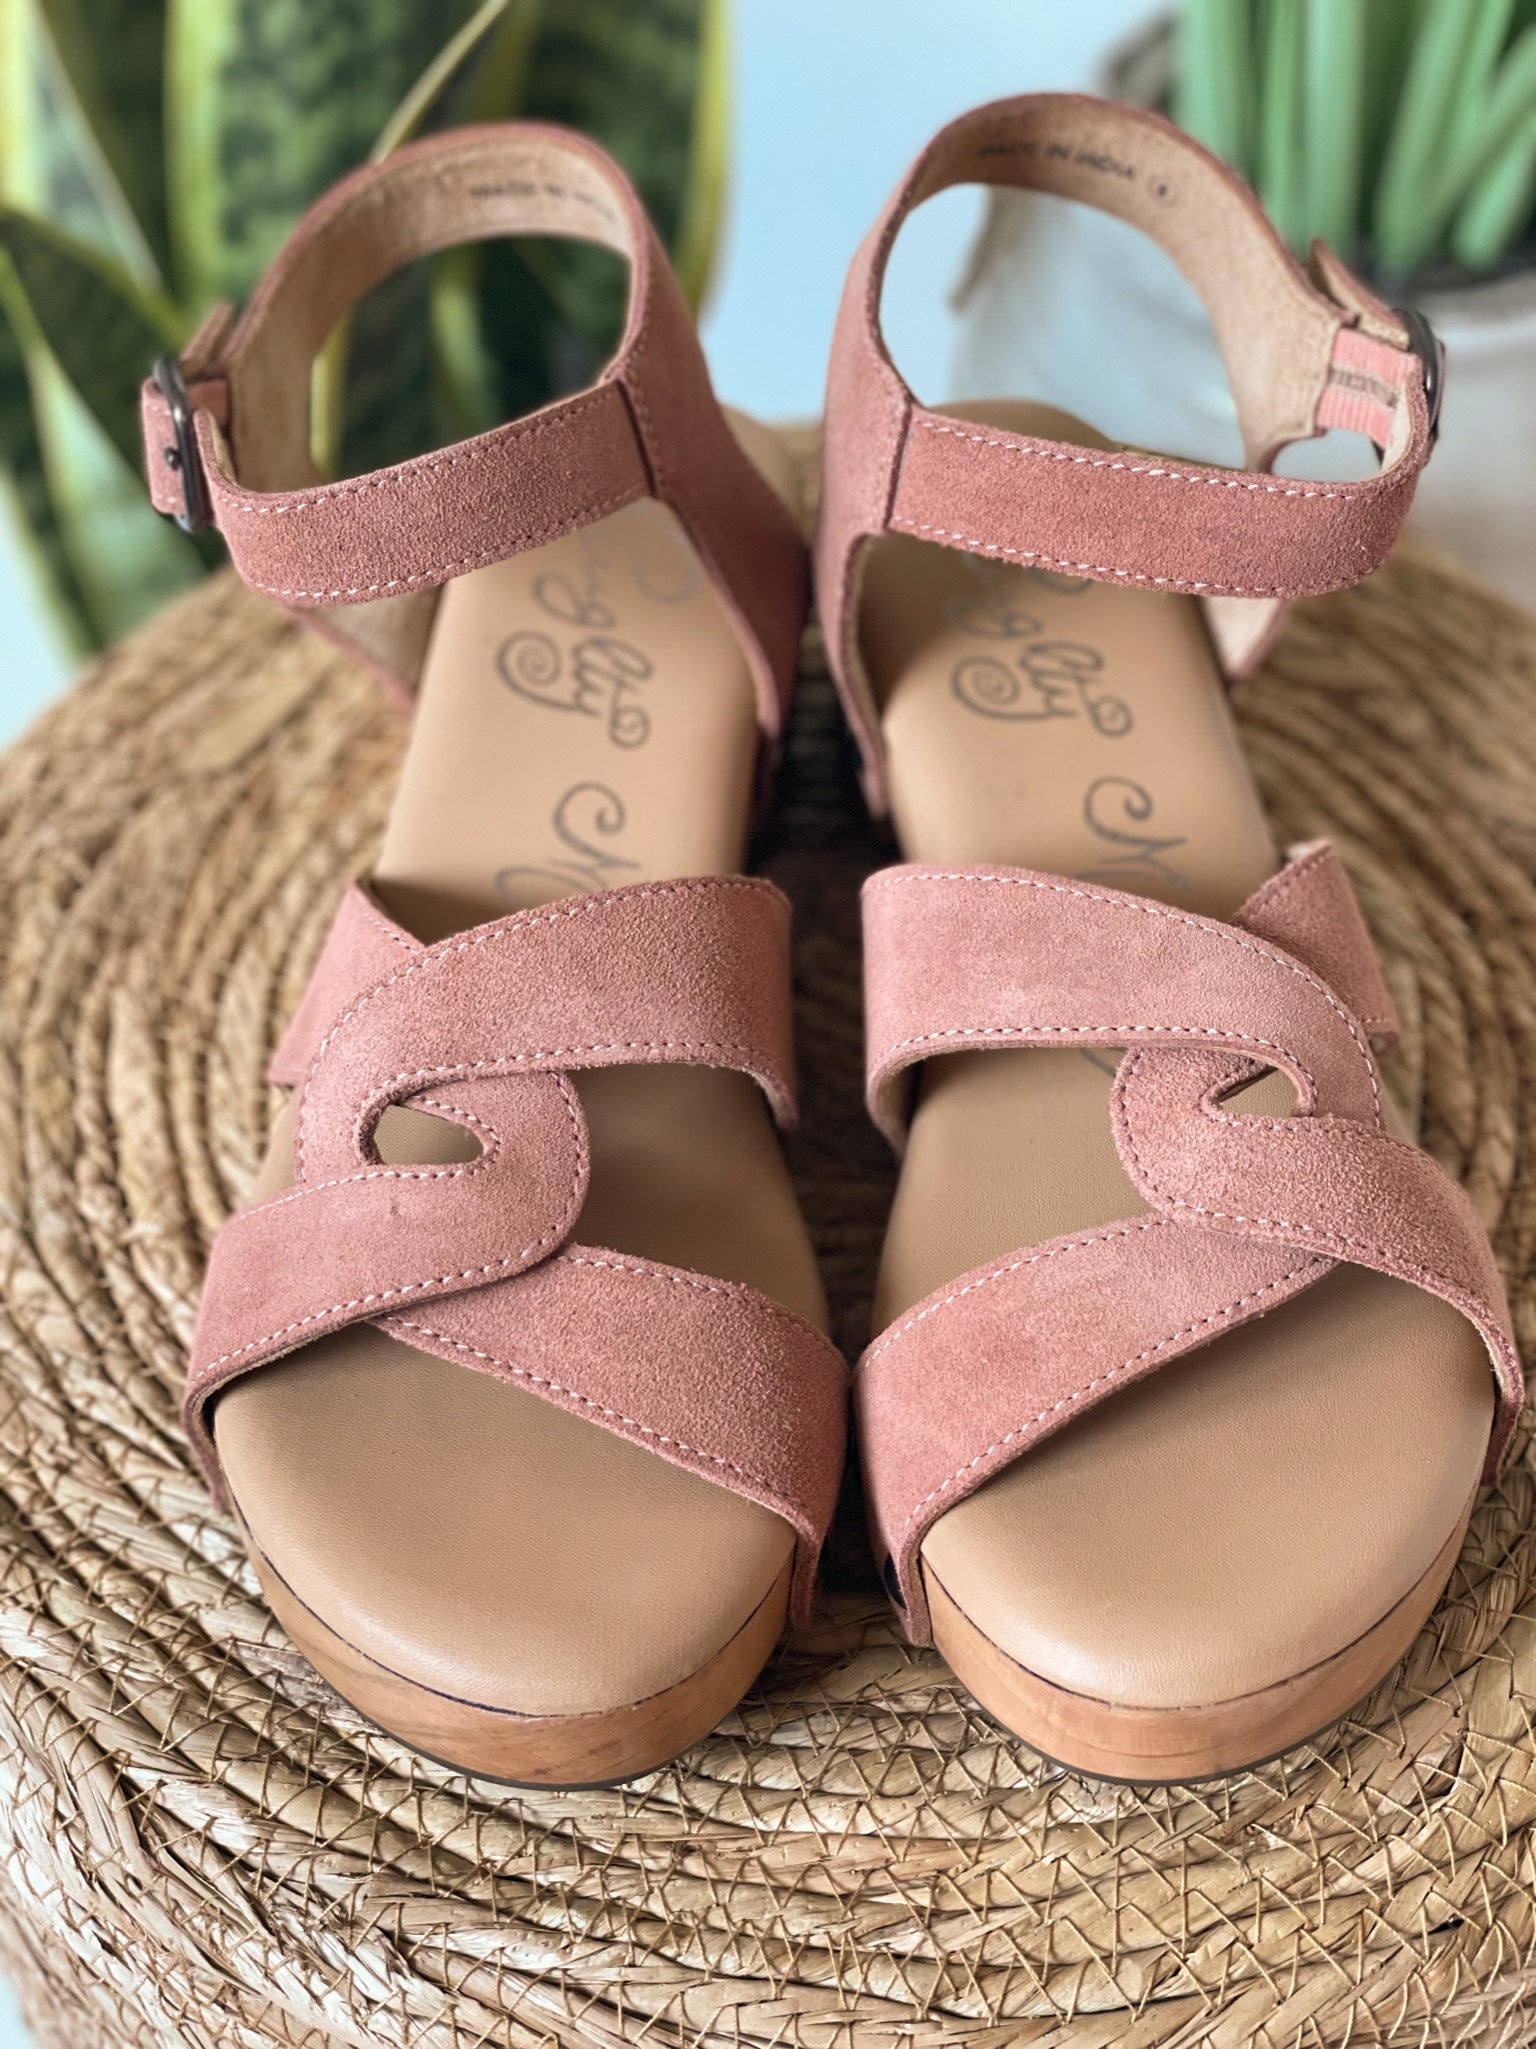 Strausse Sandals in Rose